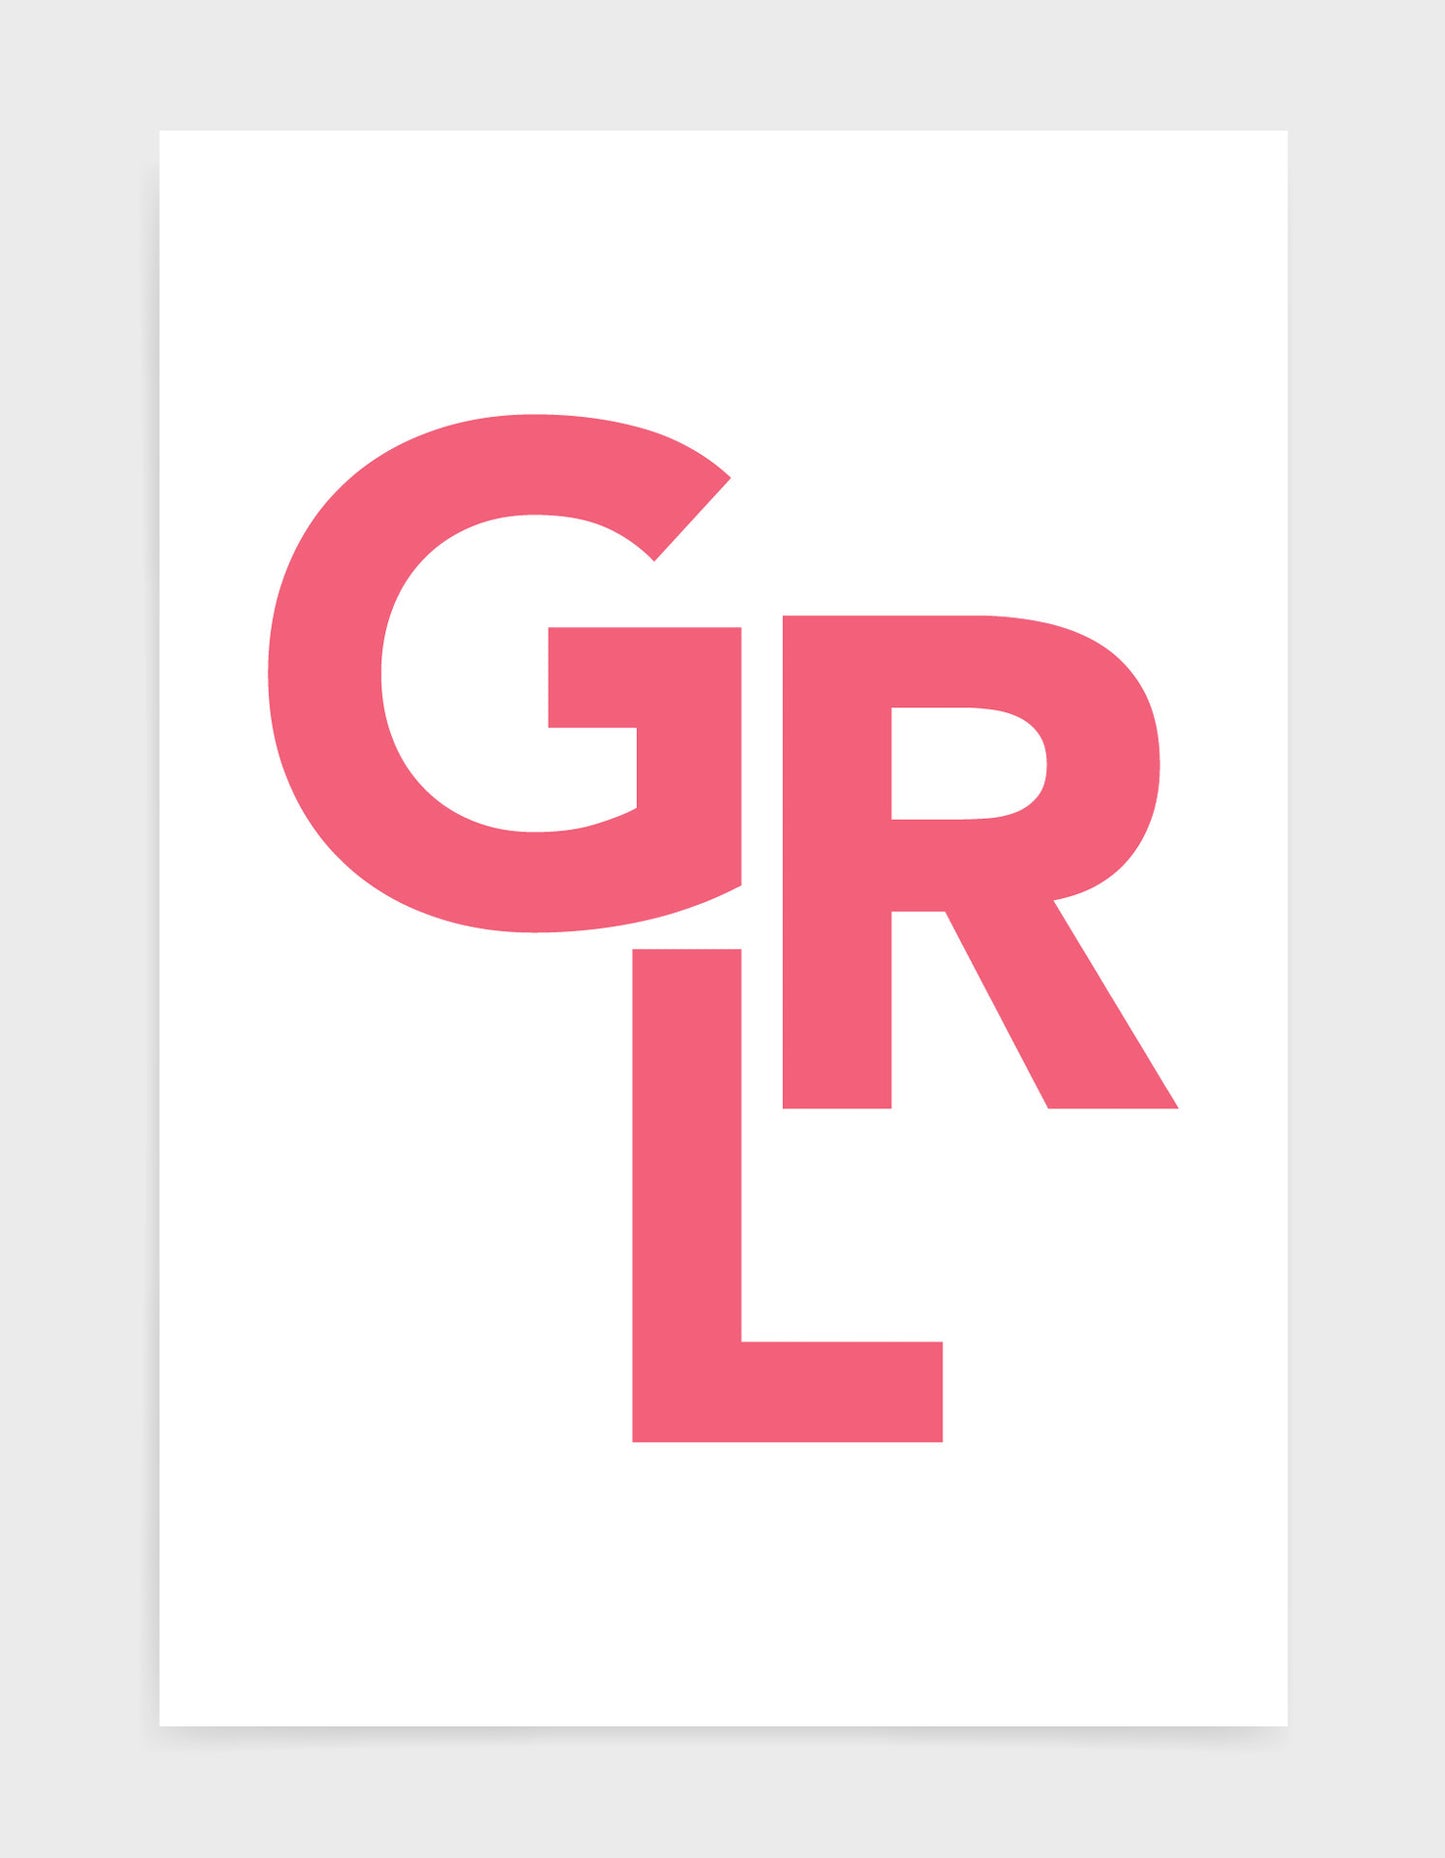 typography art print of the word GRL in pink text against a white background